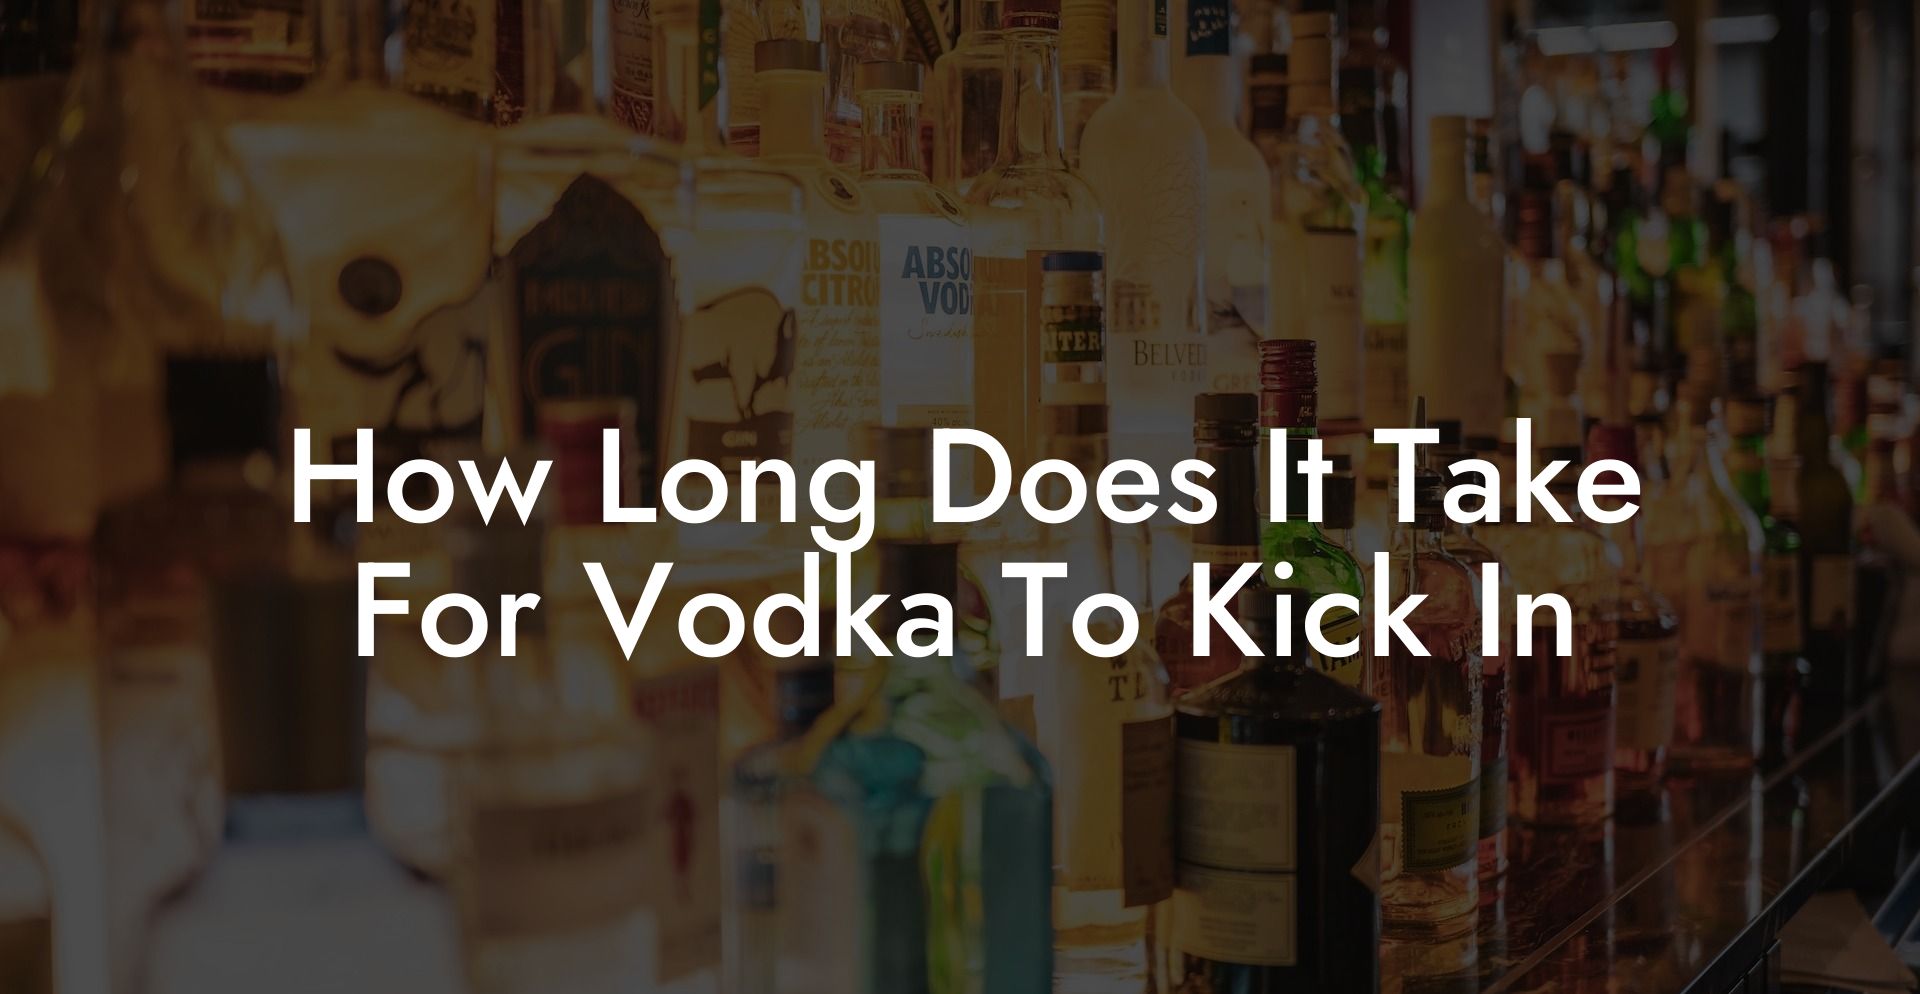 How Long Does It Take For Vodka To Kick In